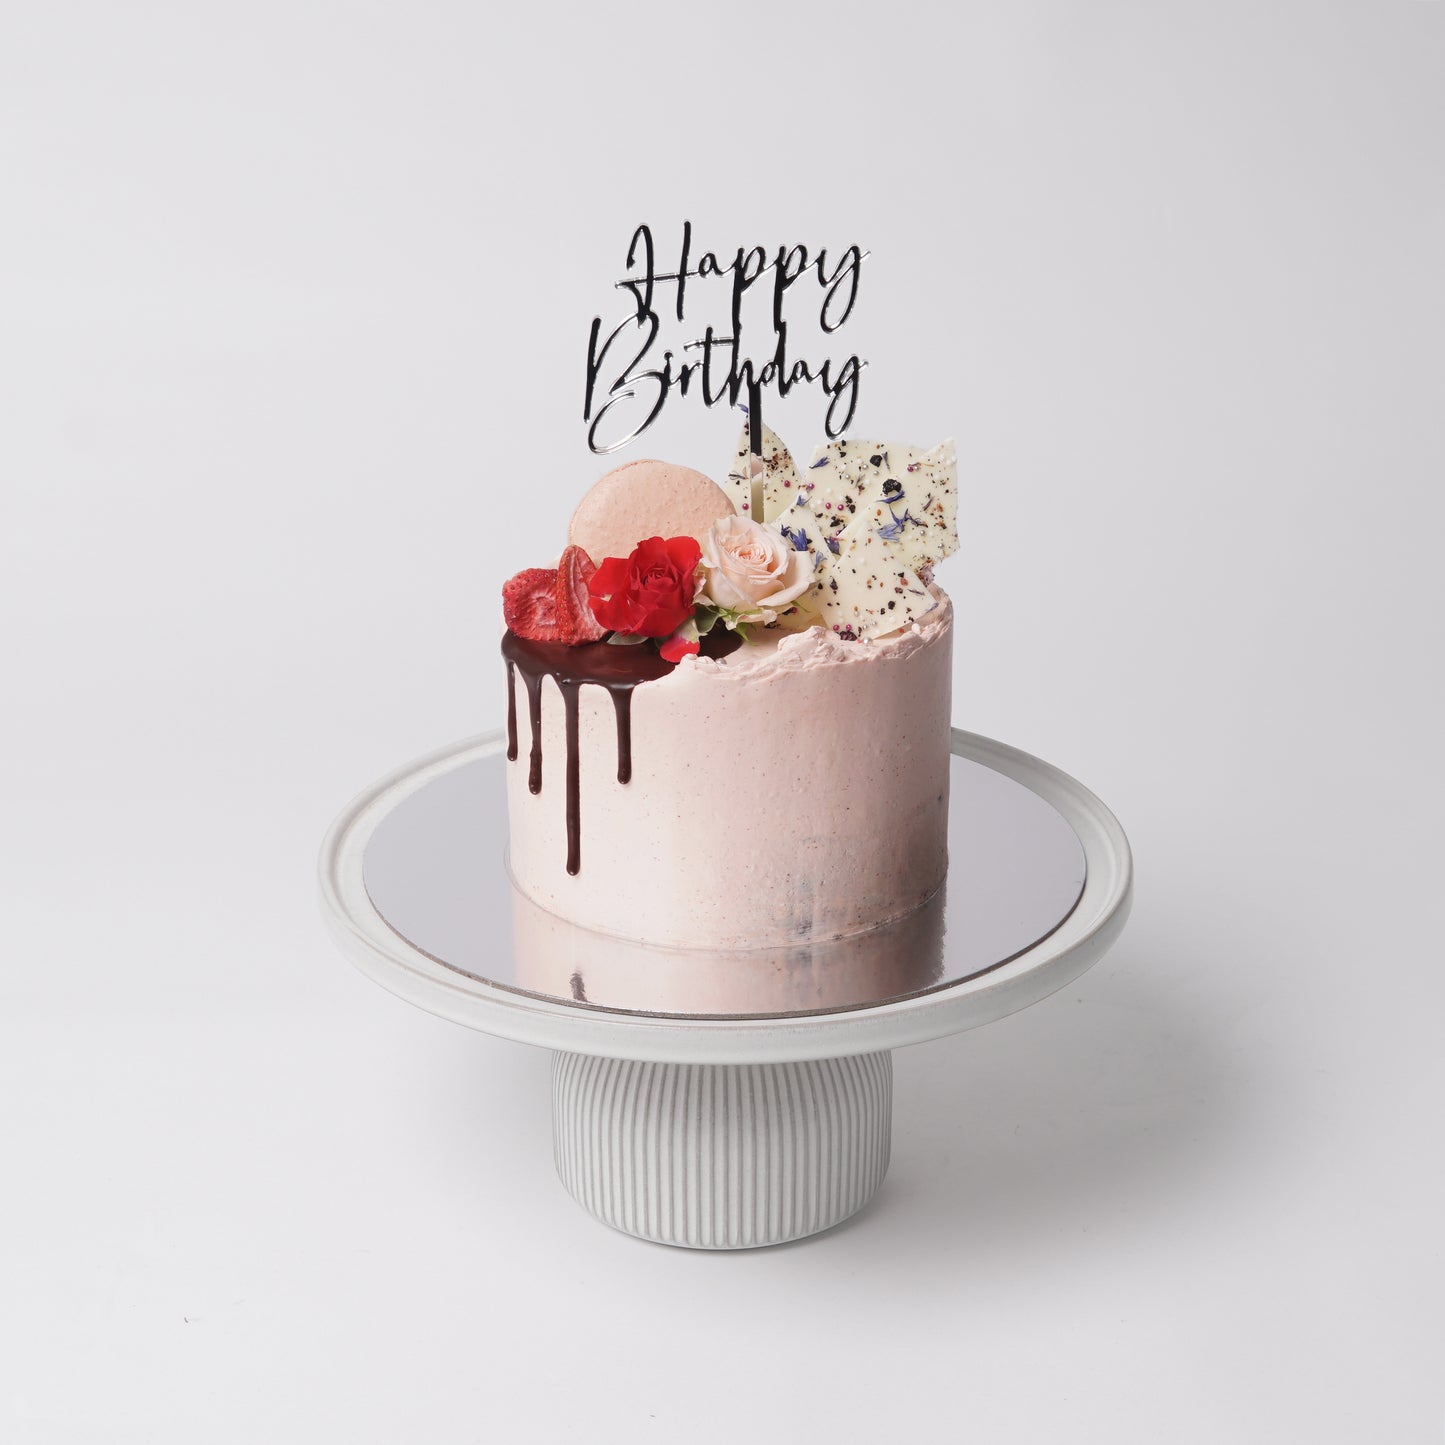 CHOCOLATE & STRAWBERRY CAKE WITH HAPPY BIRTHDAY MIRROR TOPPER IN 2 DAYS